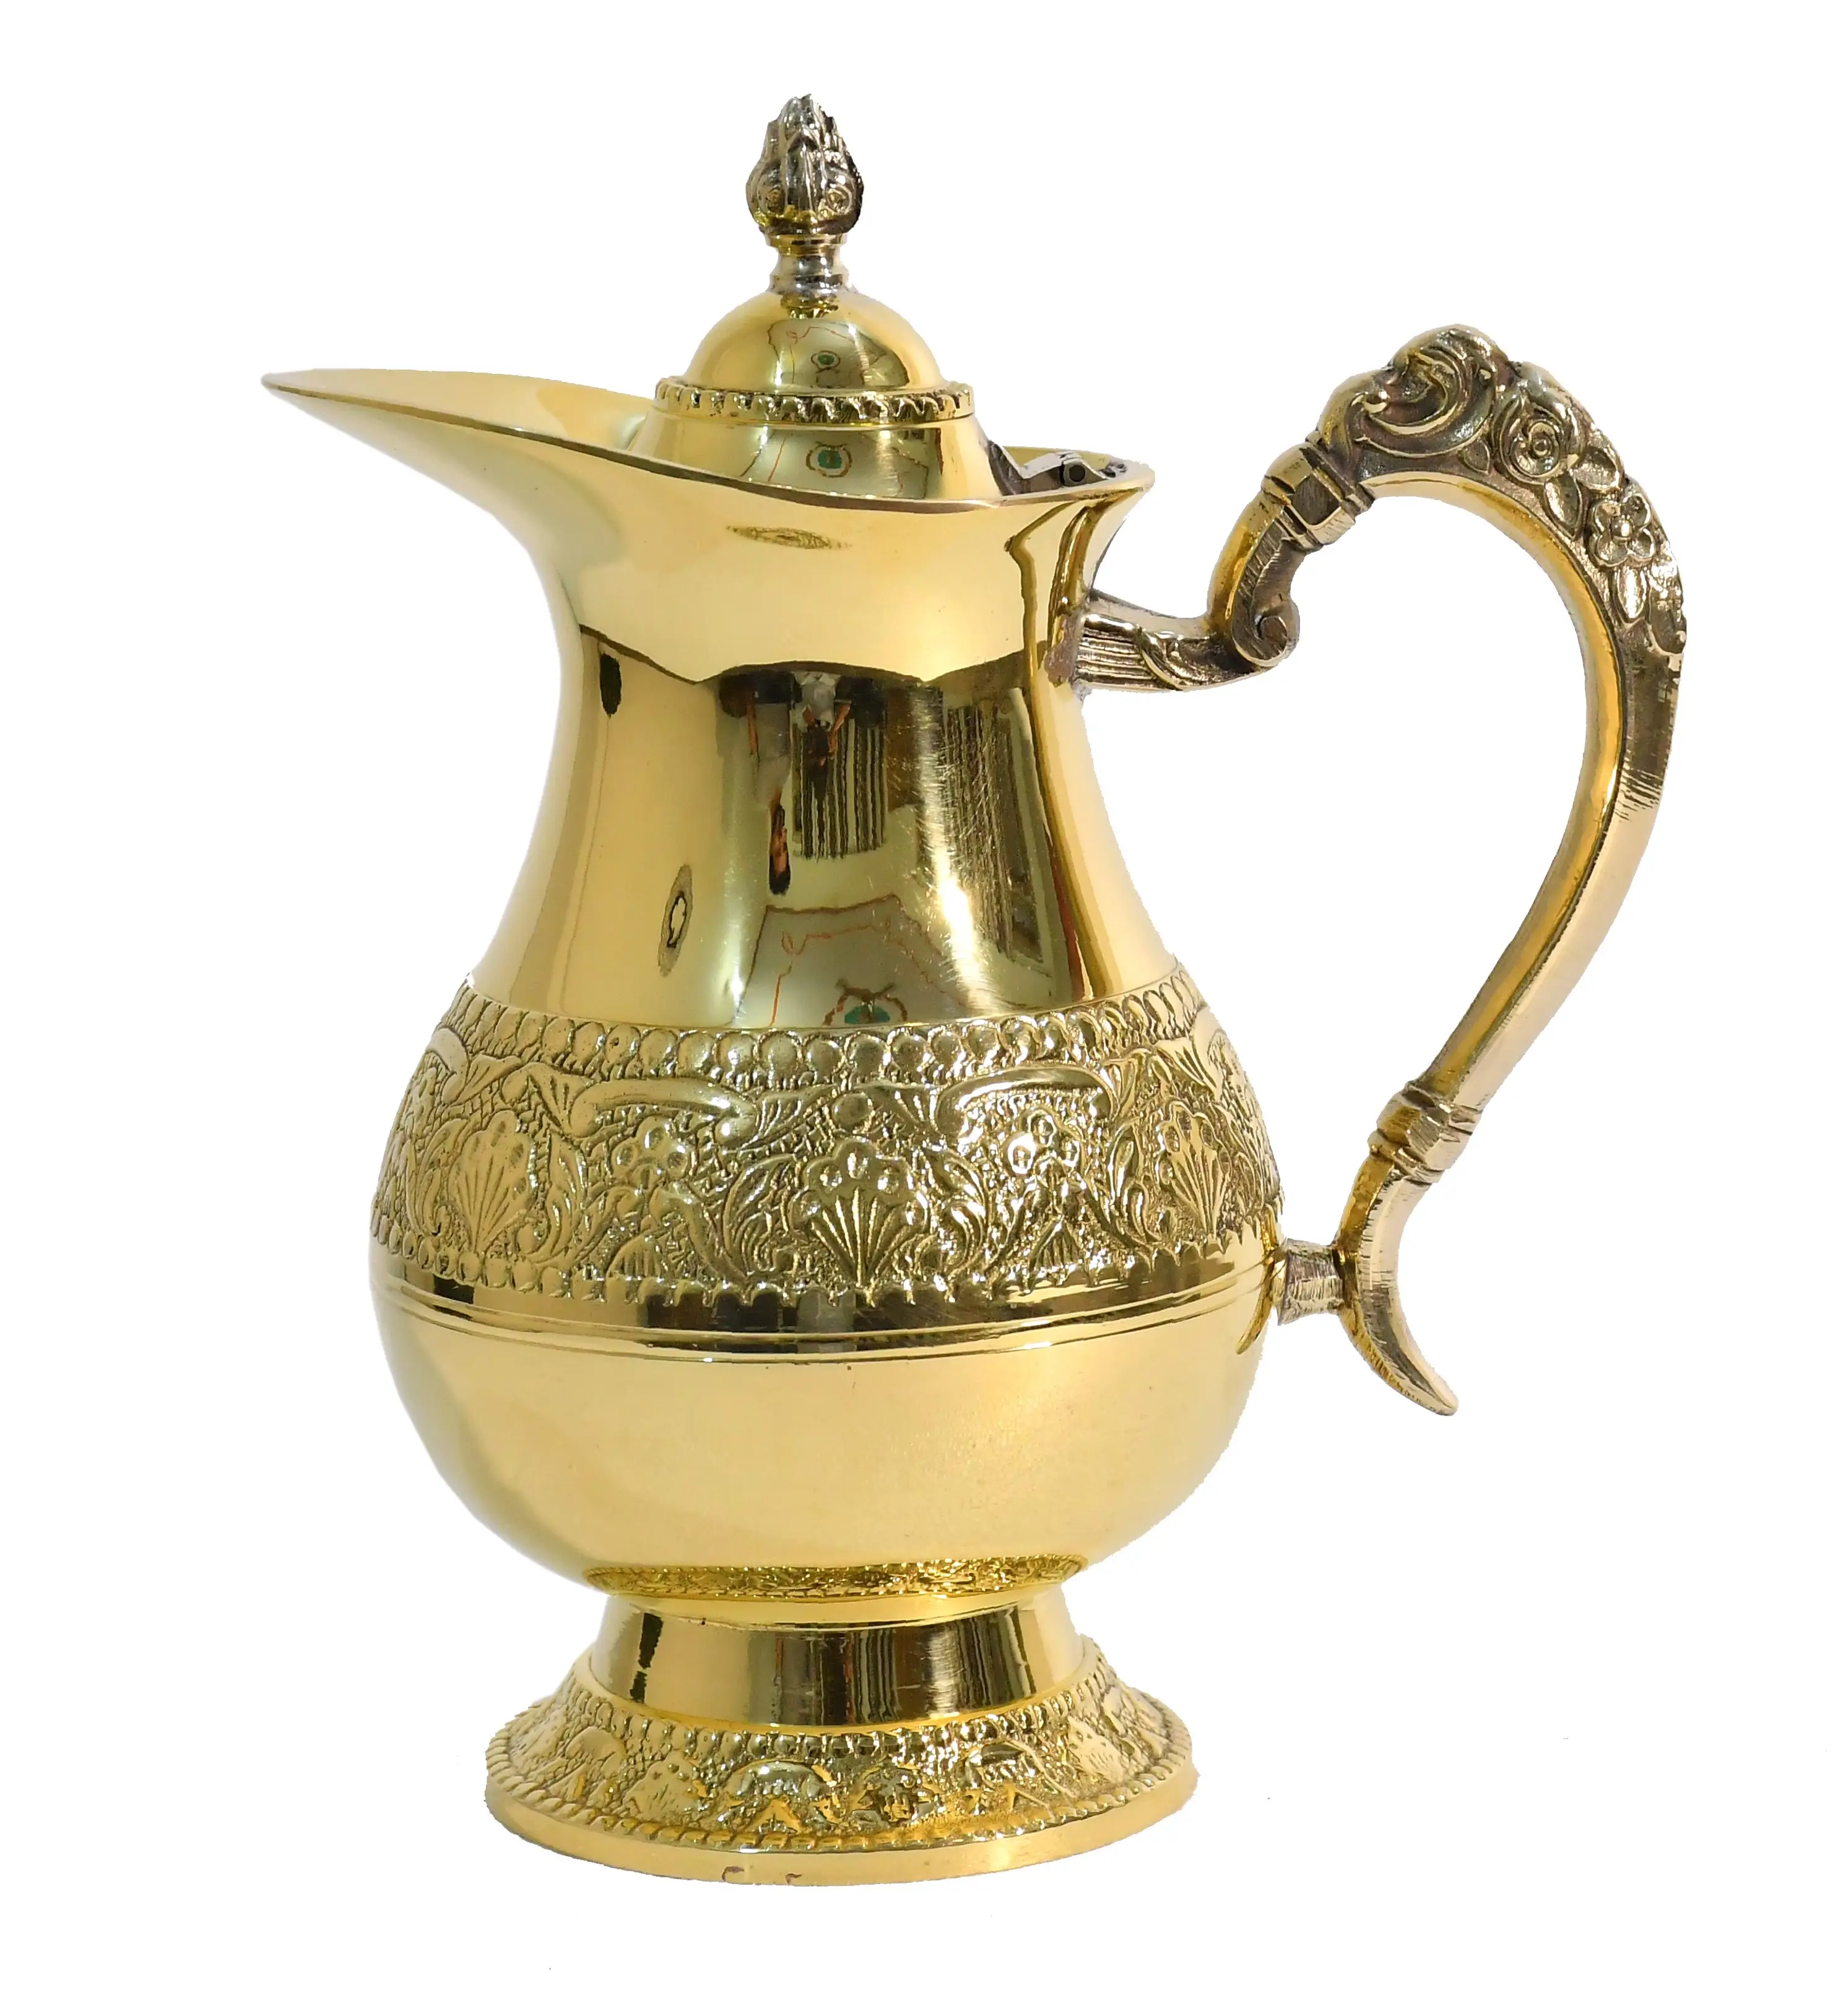 Personalized Brass Jug Pitcher With Attached Lid At Wholesale Price Handmade High Quality Brass Product Manufacturing